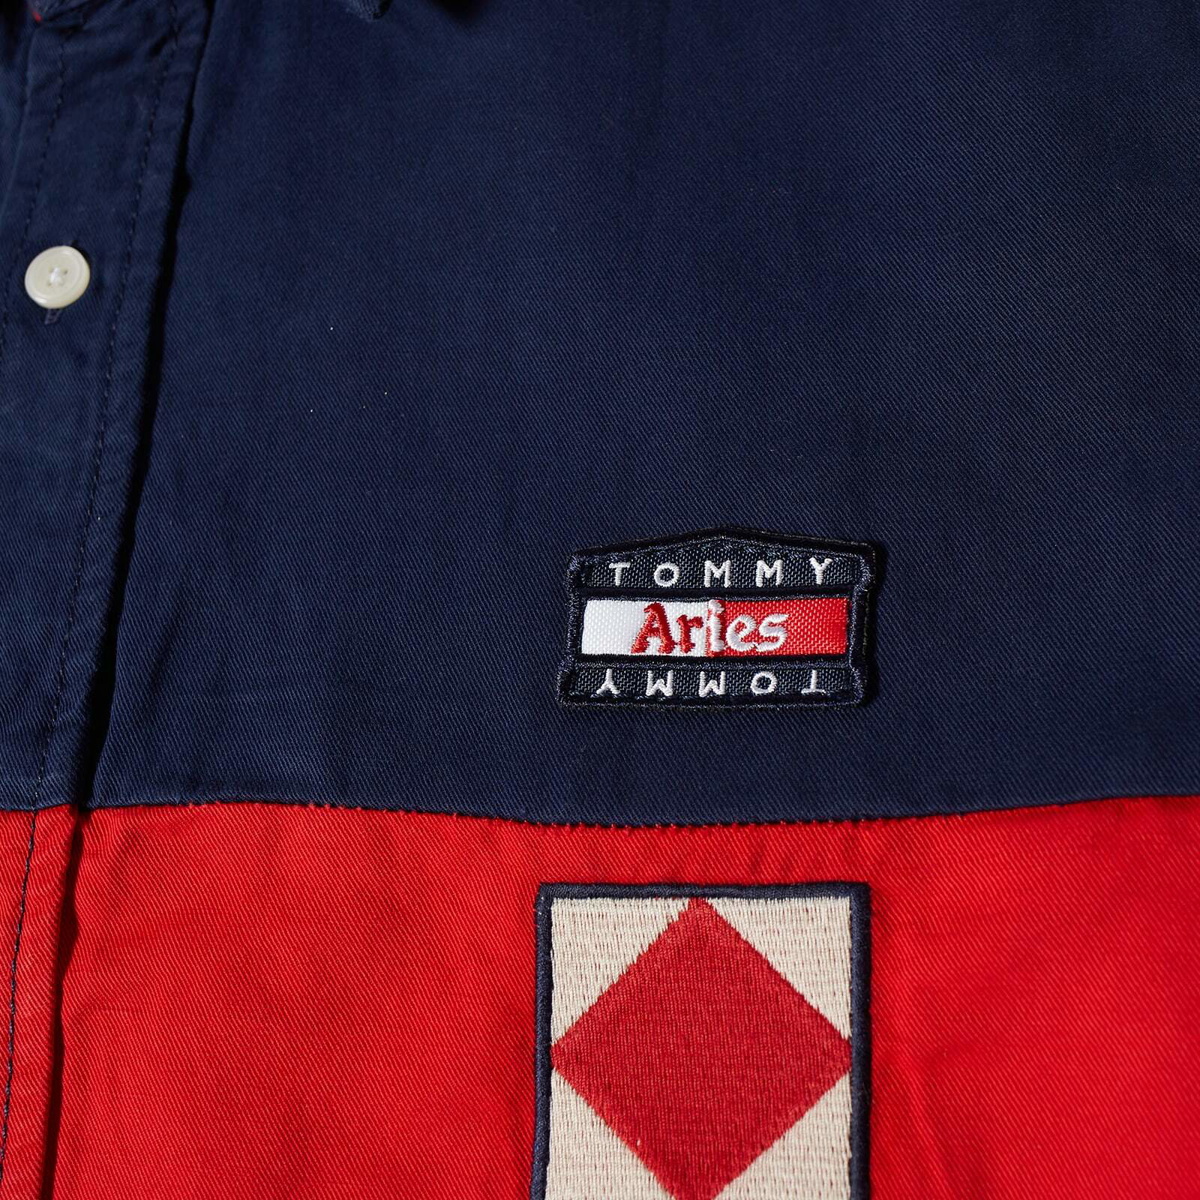 Tommy Jeans x Aries Multi Flags Shirt in Desert Sky Tommy Jeans